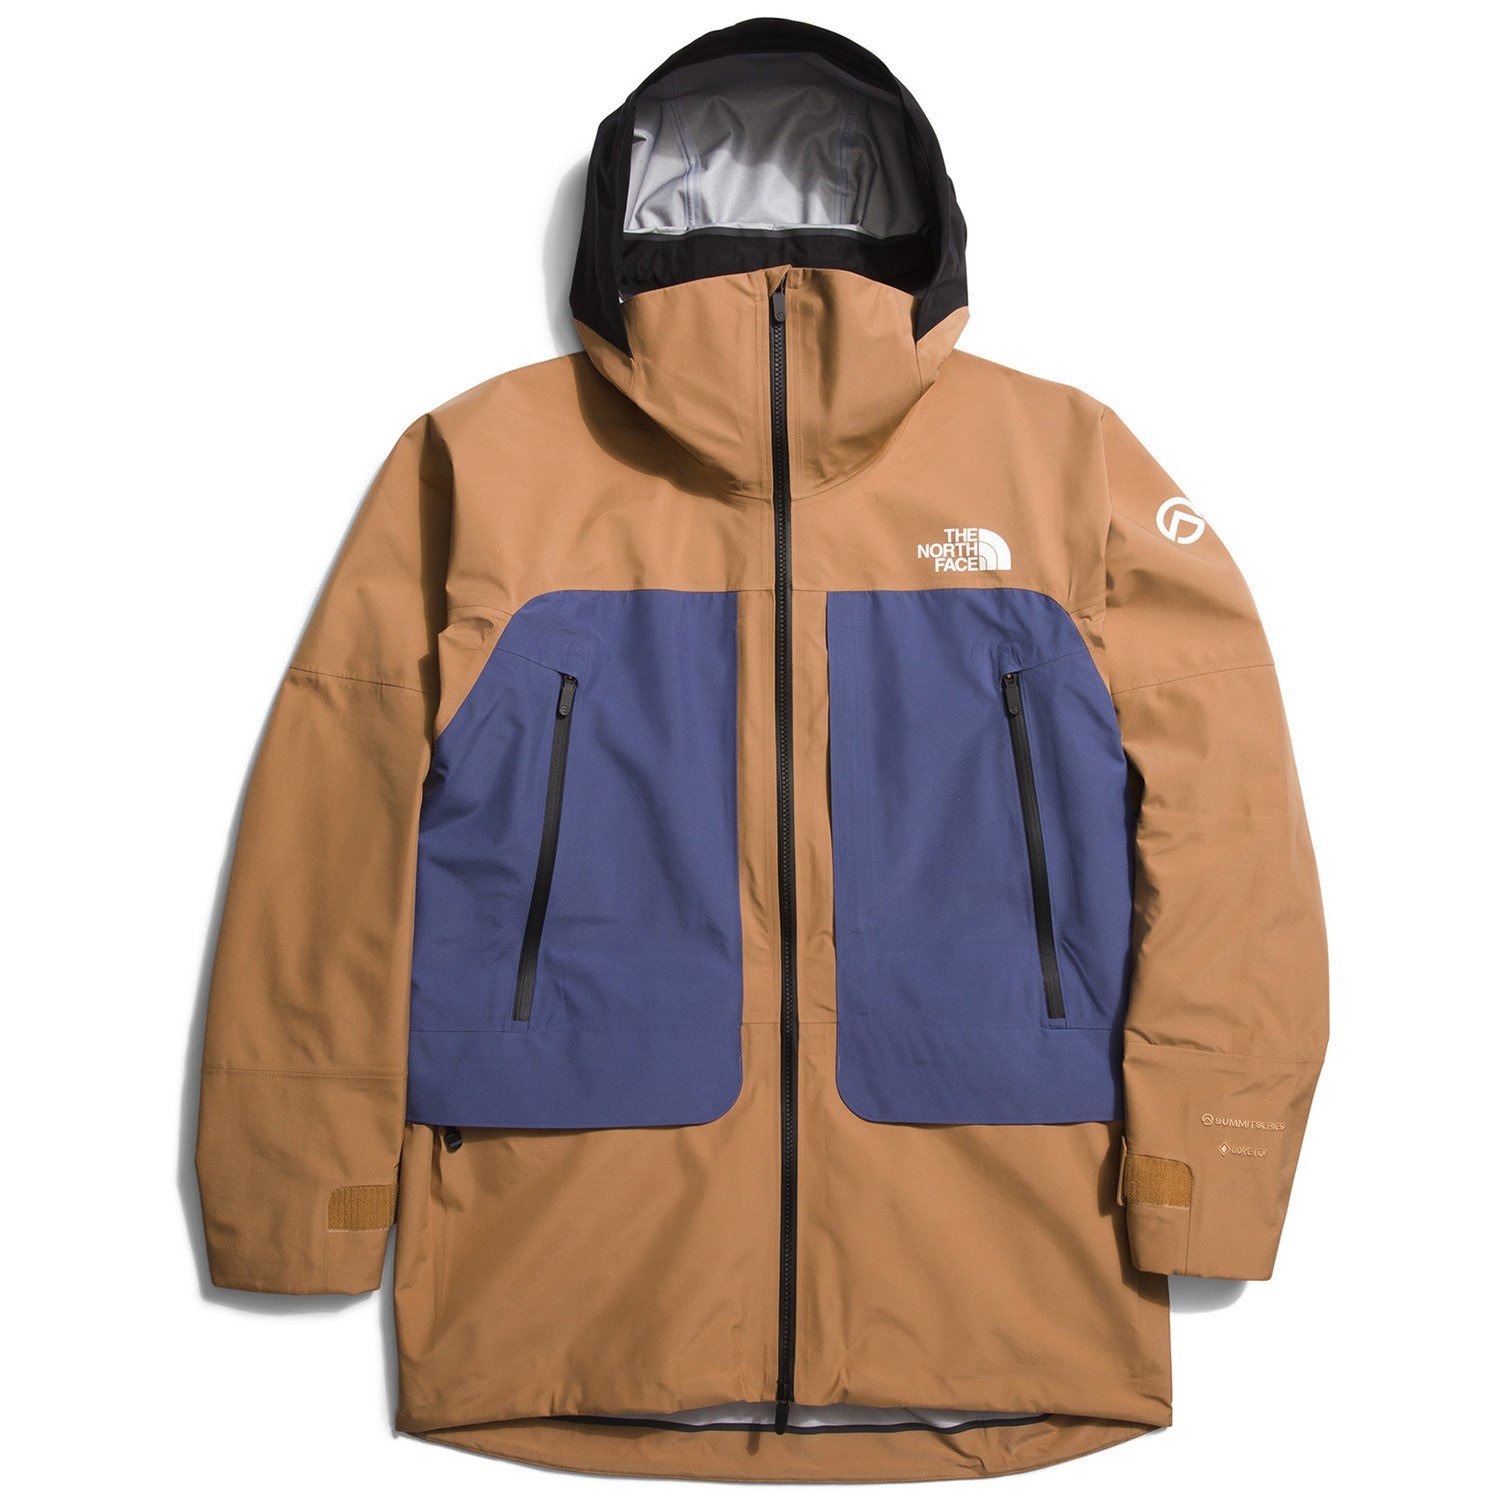 цена Куртка The North Face Summit Verbier GORE-TEX, цвет Almond Butter/Cave Blue